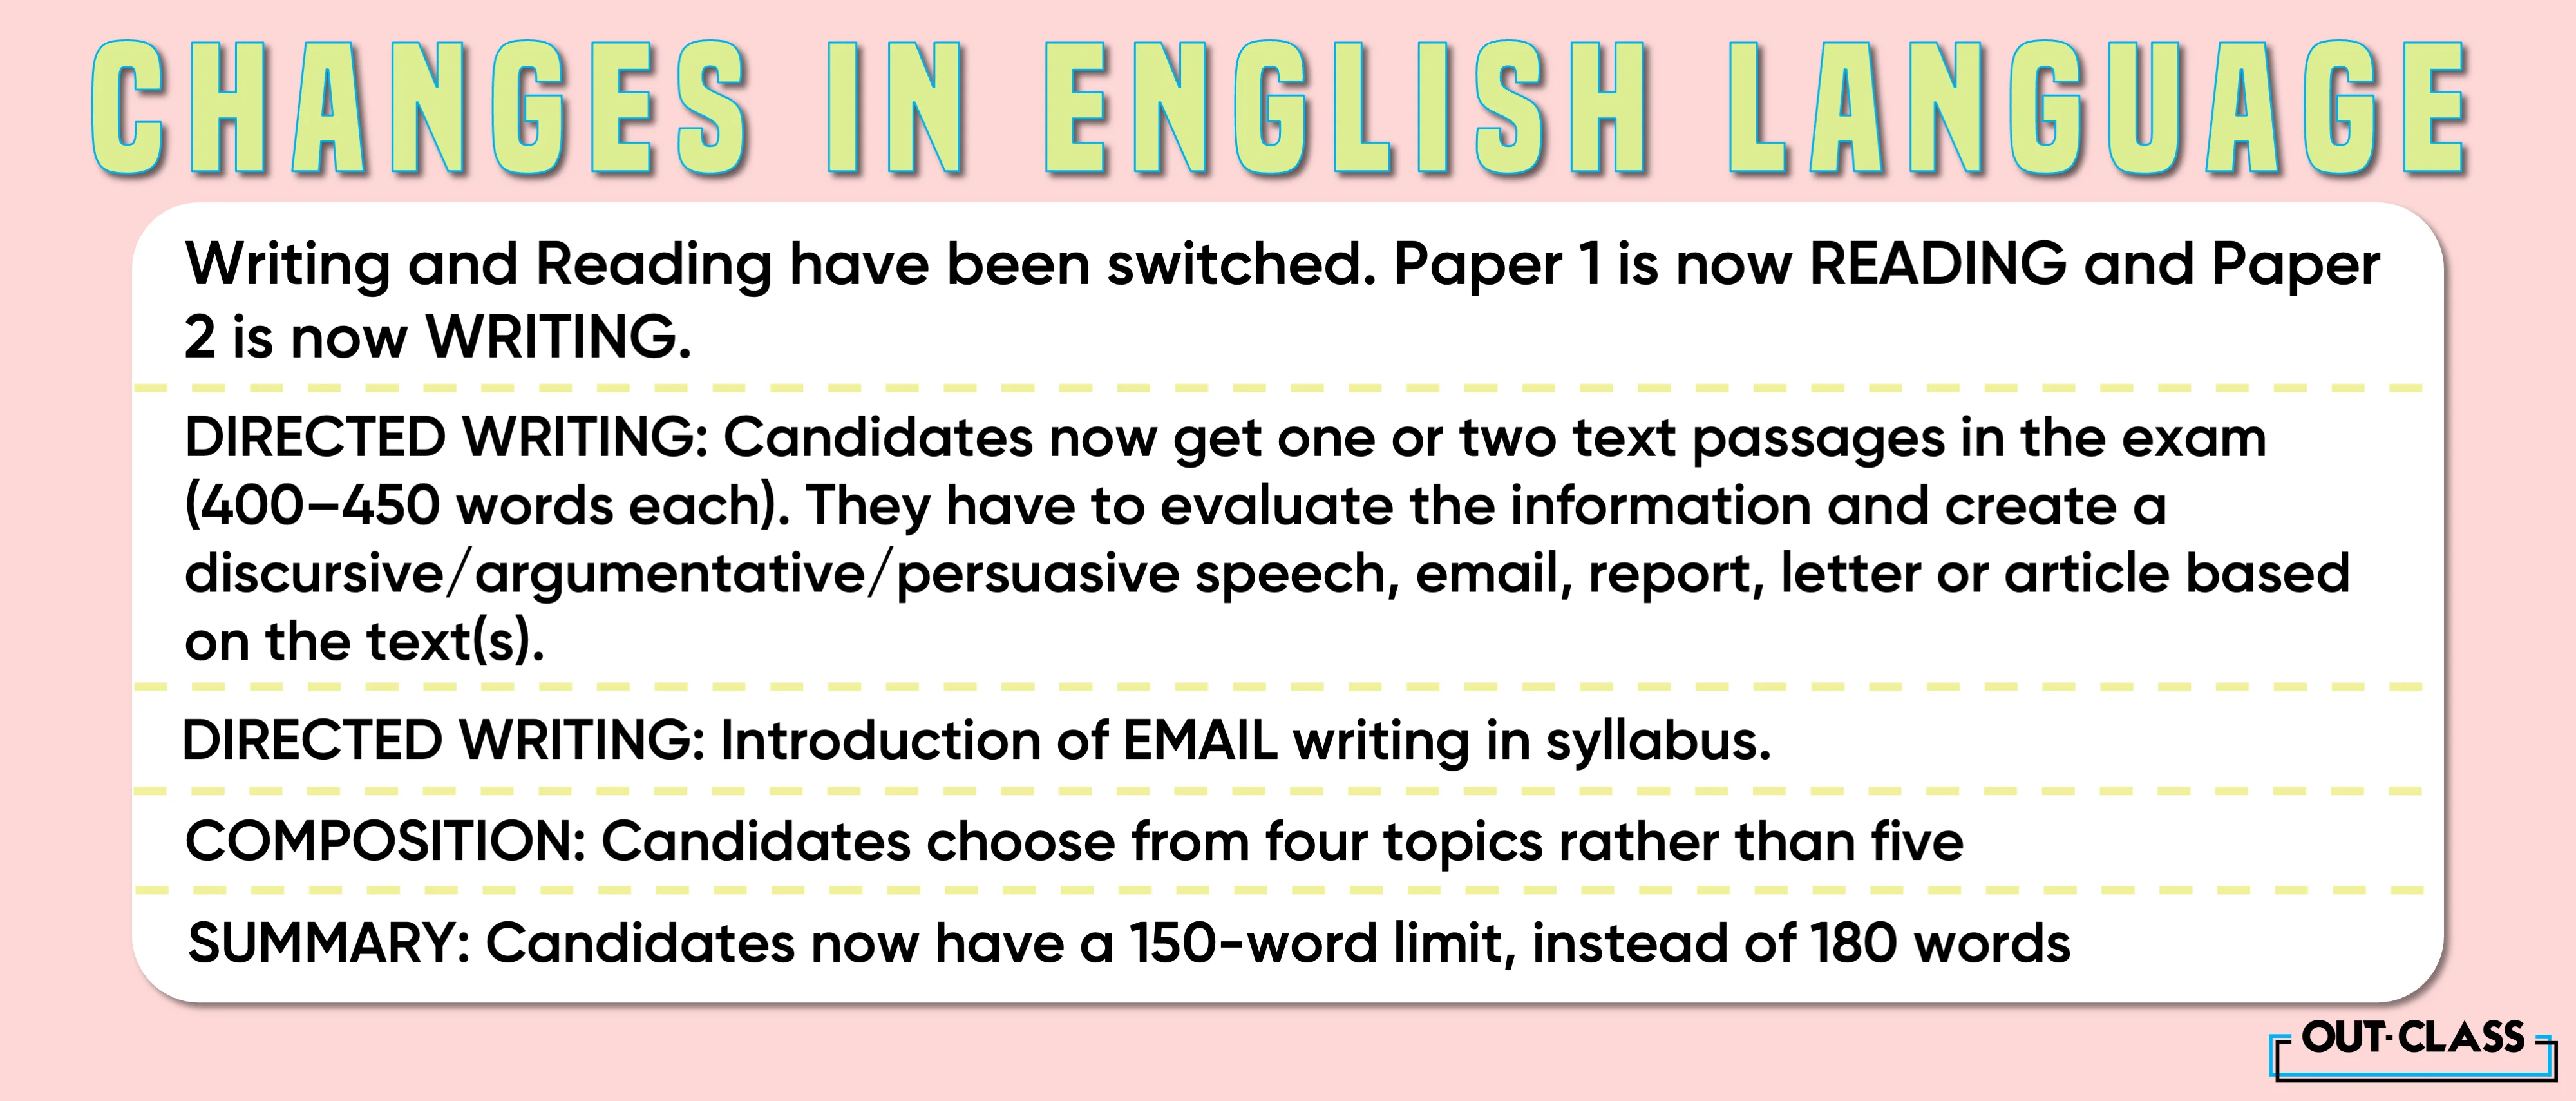 It shows the key changes of the O level english language syllabus and past paper.  